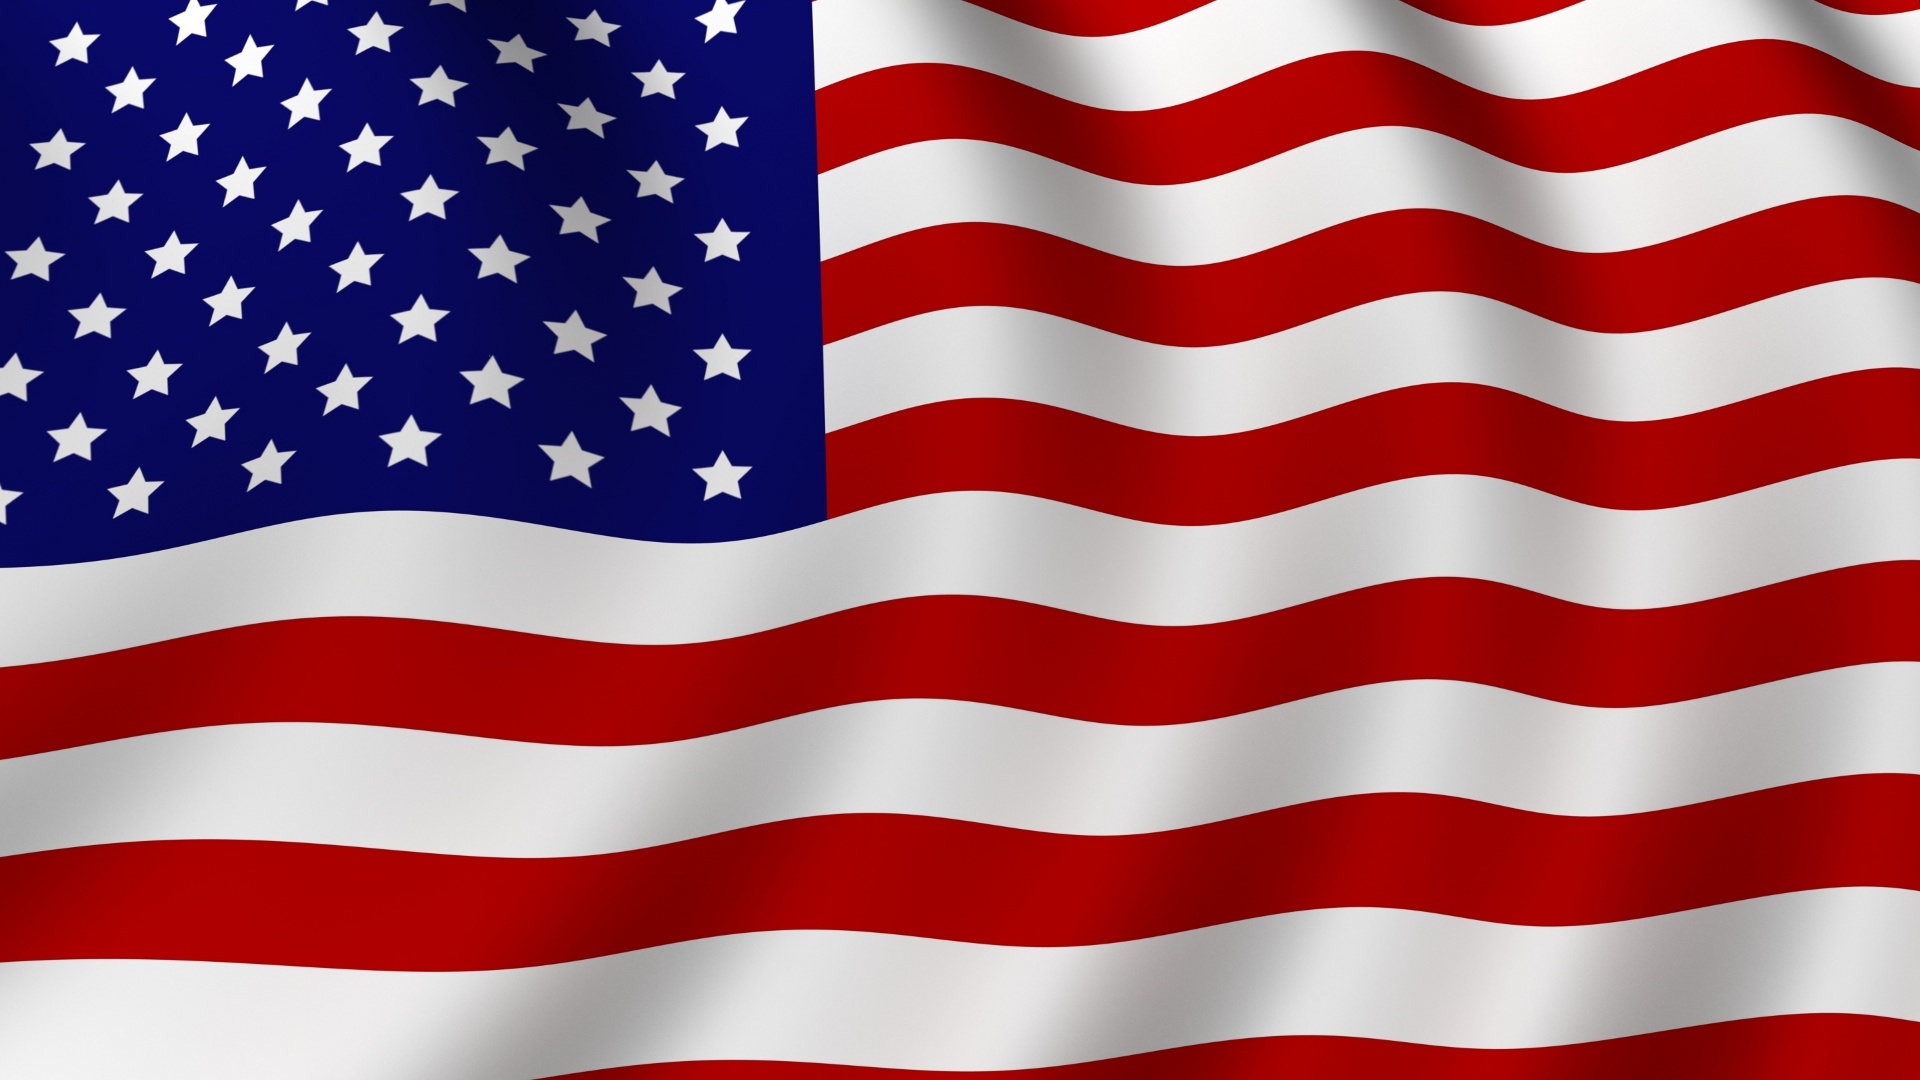 US Flag wallpapers 1920x1080